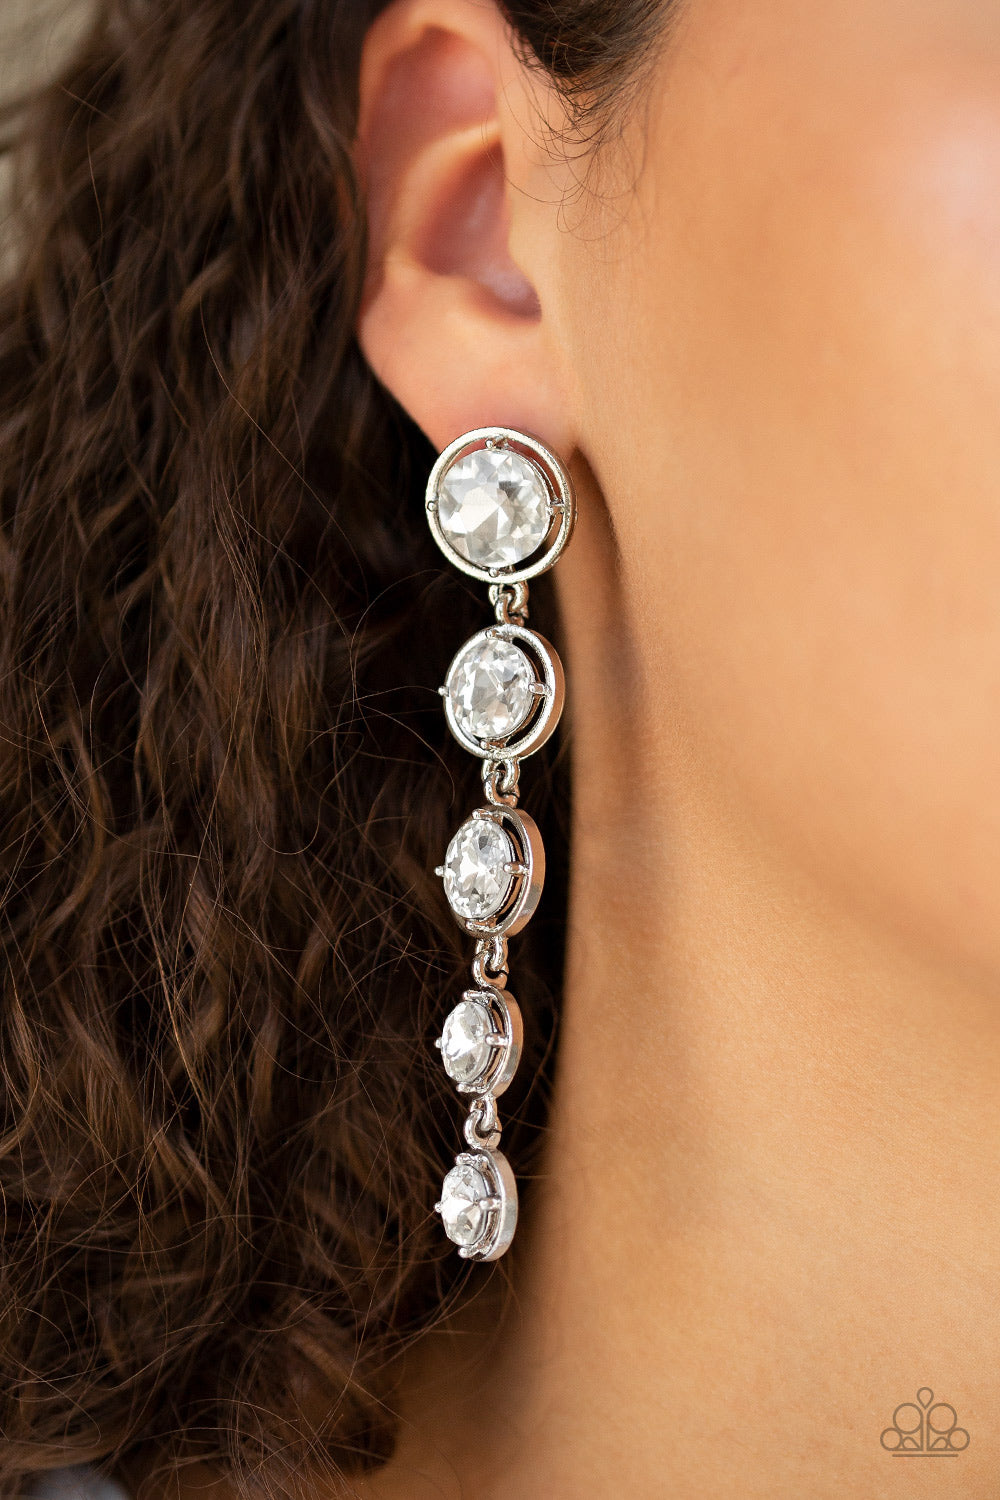 Paparazzi Jewelry & Accessories - Drippin In Starlight - White Rhinestone Earrings. Bling By Titia Boutique